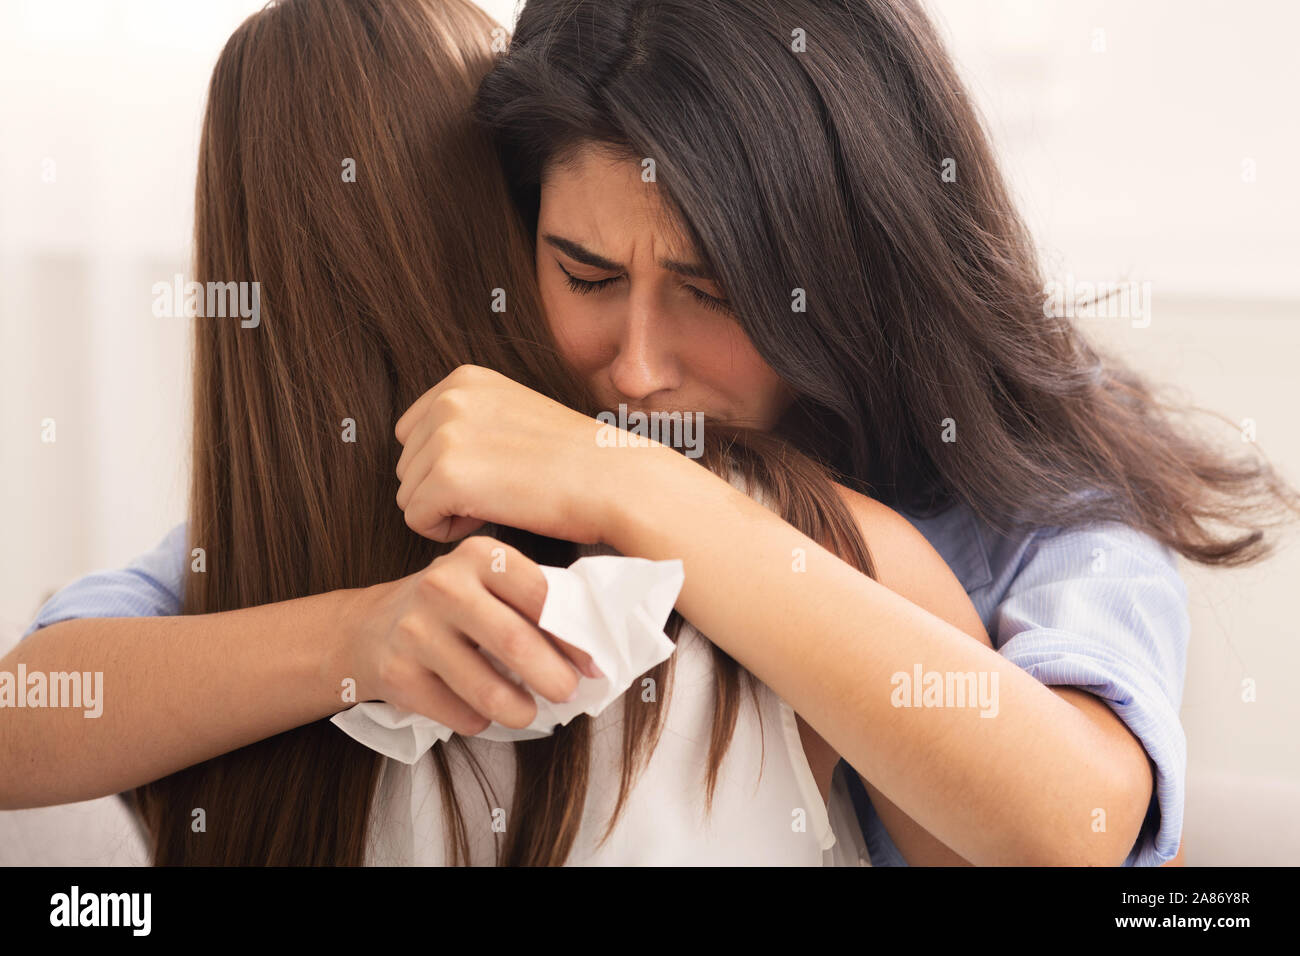 Woman Embracing Depressed Friend Sitting On Sofa Indoor, Selective Focus Stock Photo